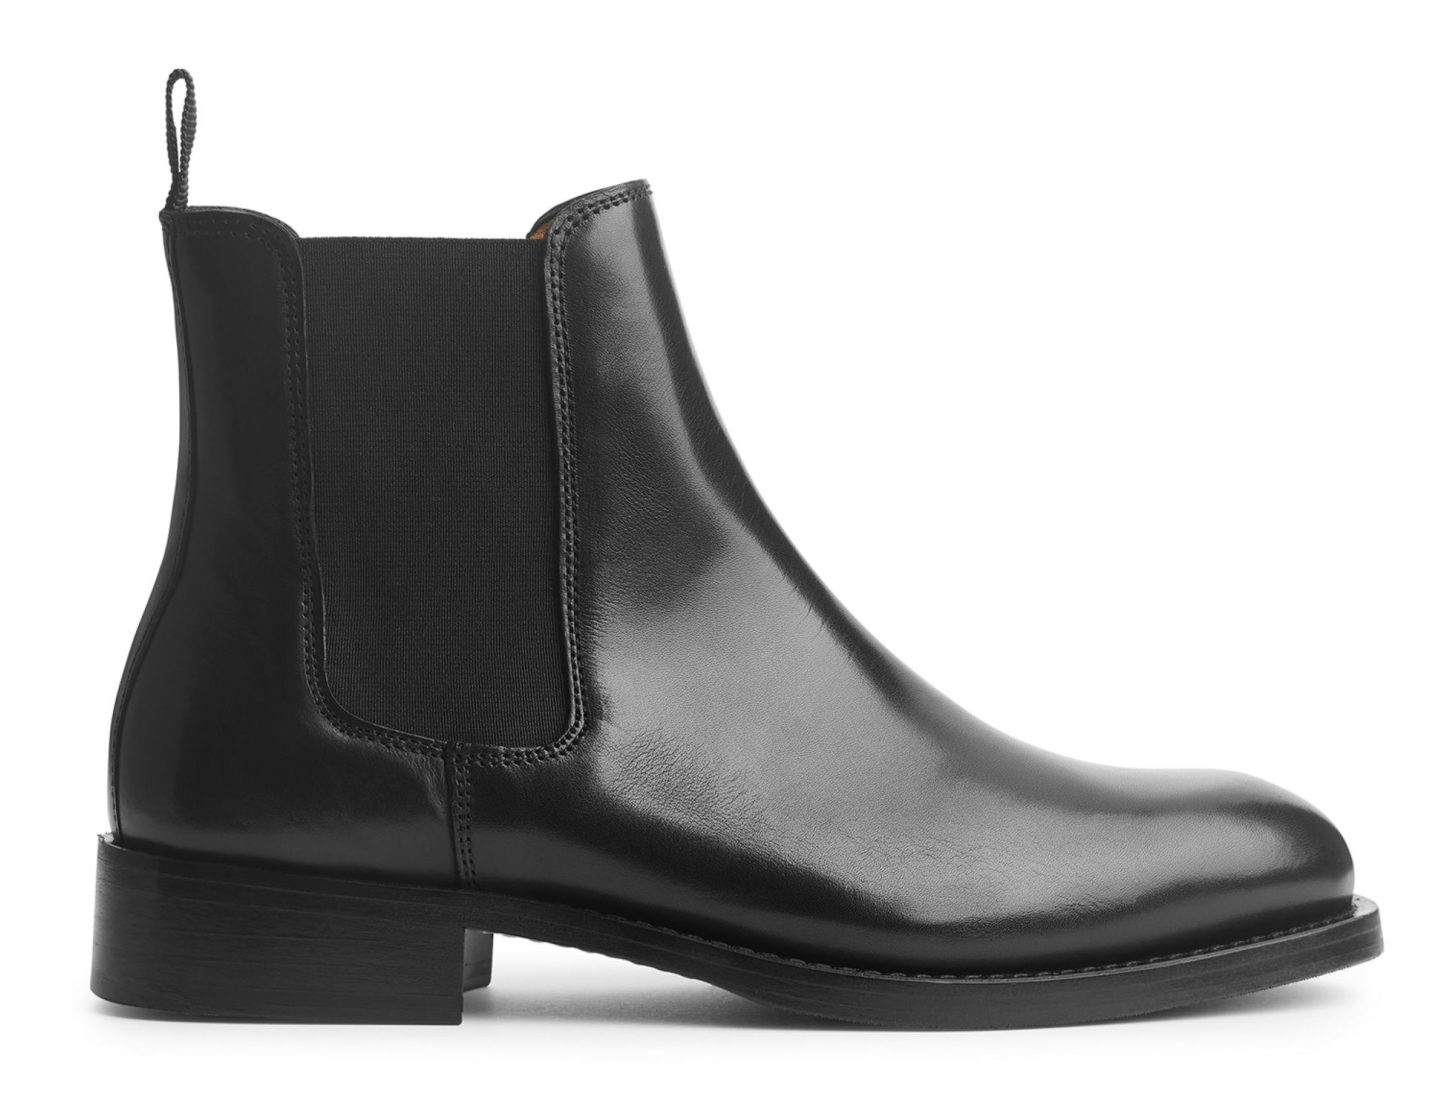 New style ankle boots for Autumn - Chic at any age